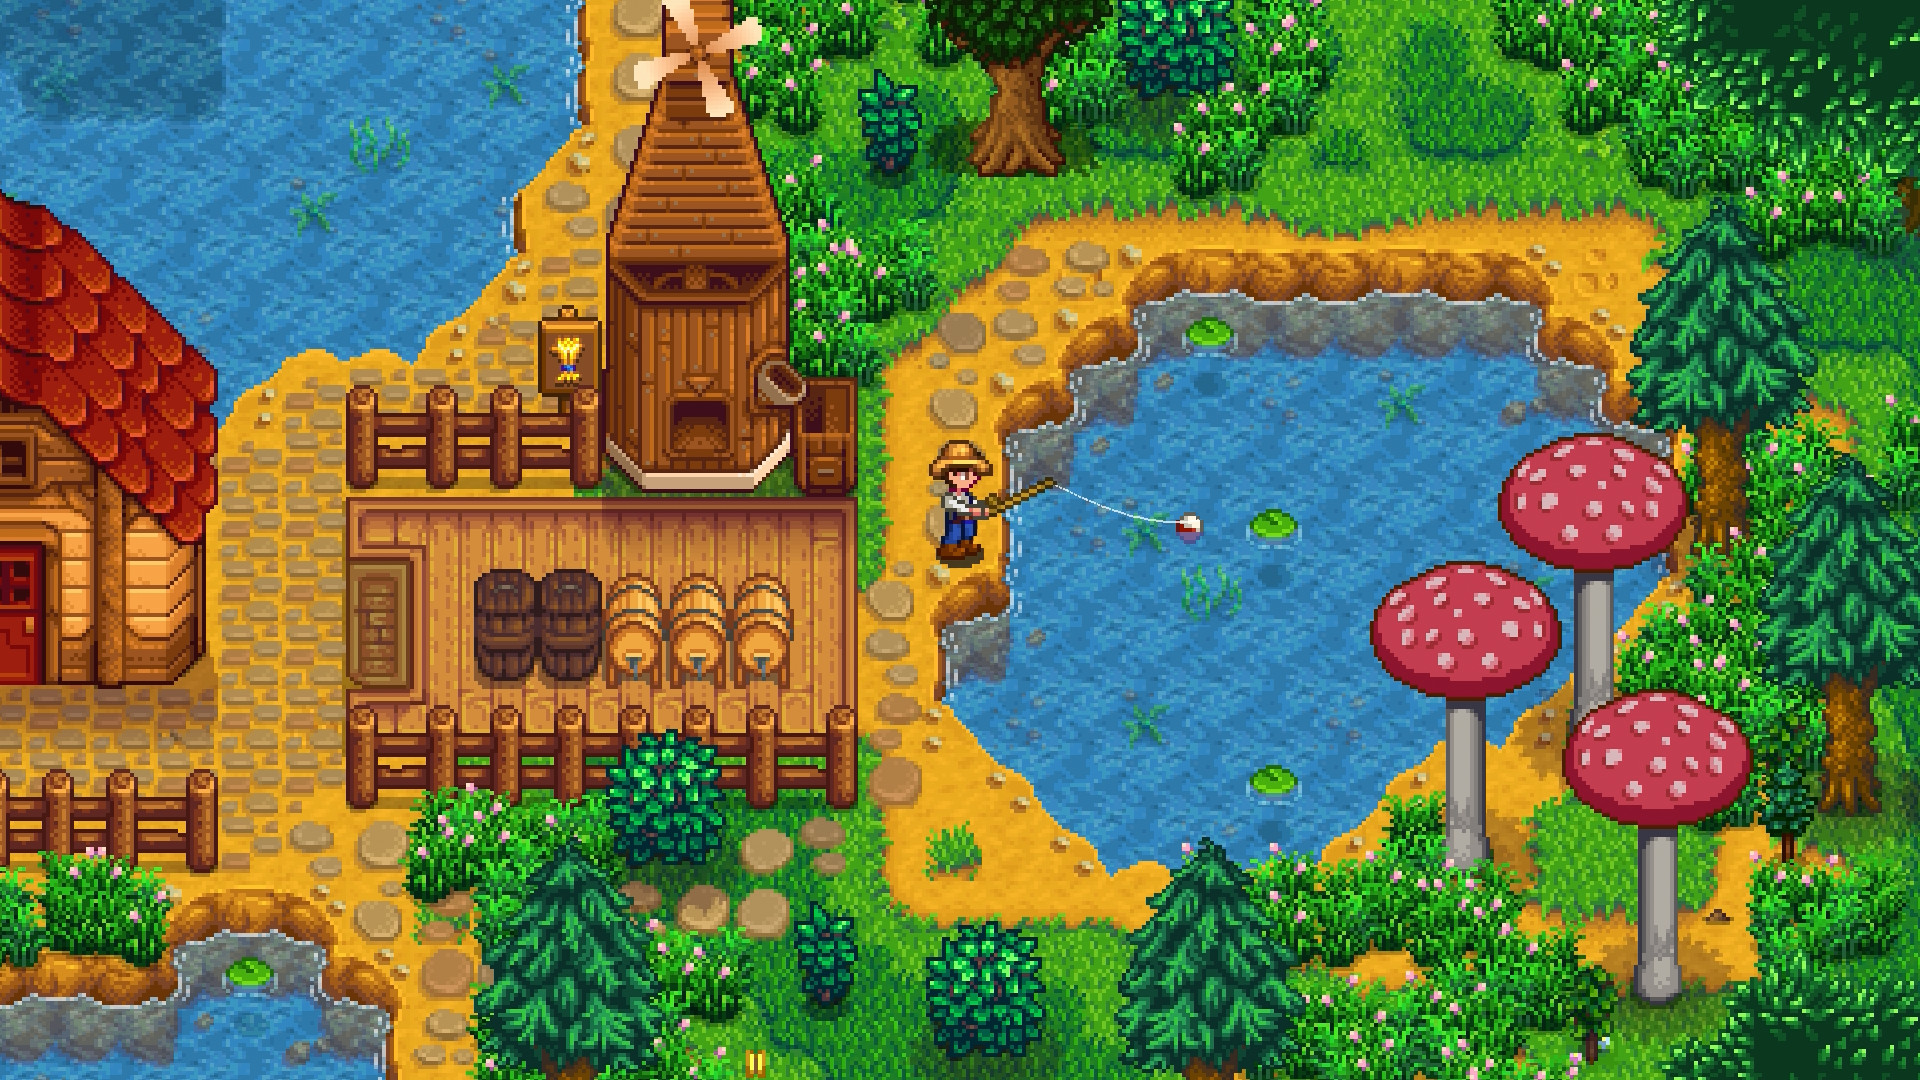 How to Mod Stardew Valley on Steam: Two Easy Methods - KeenGamer